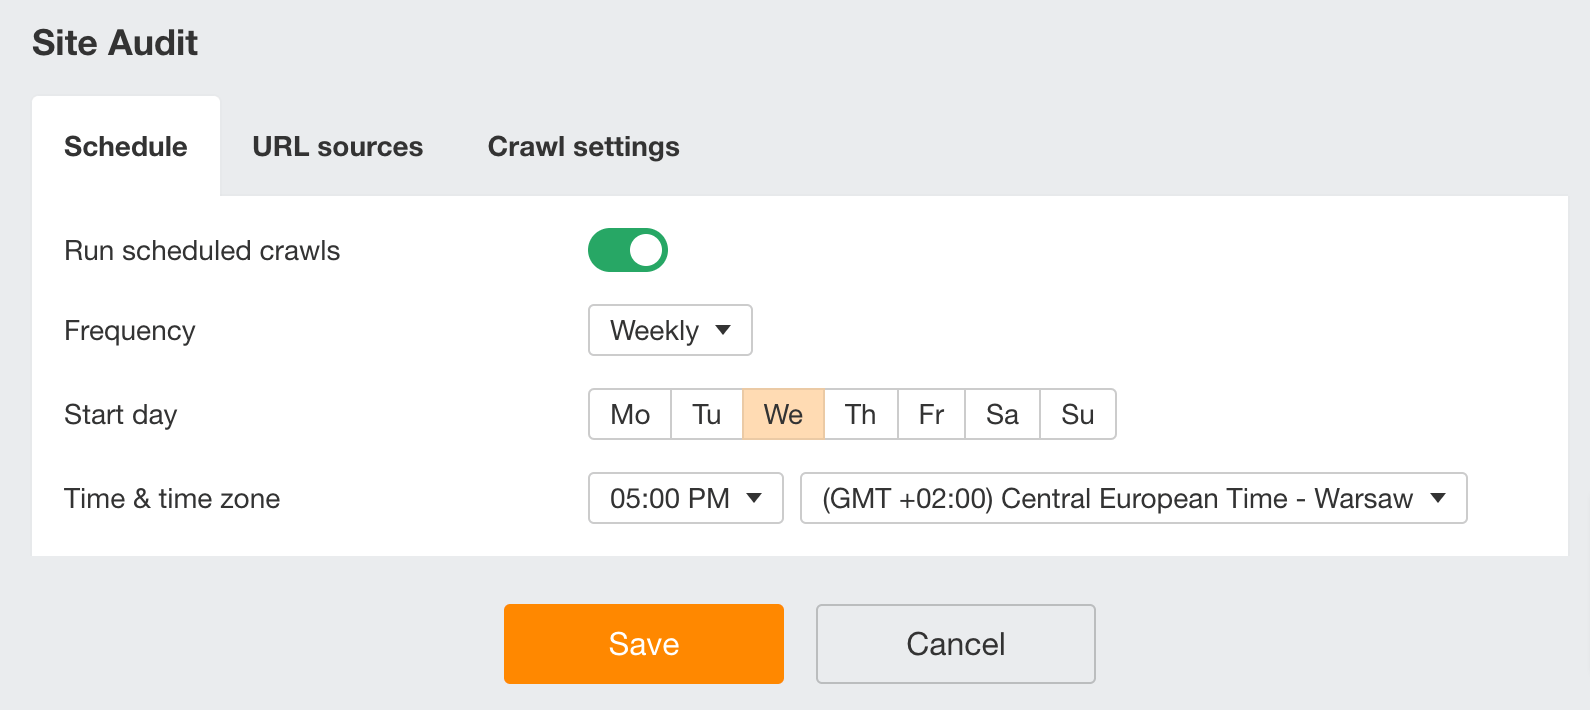 Setting up crawl schedule in Site Audit